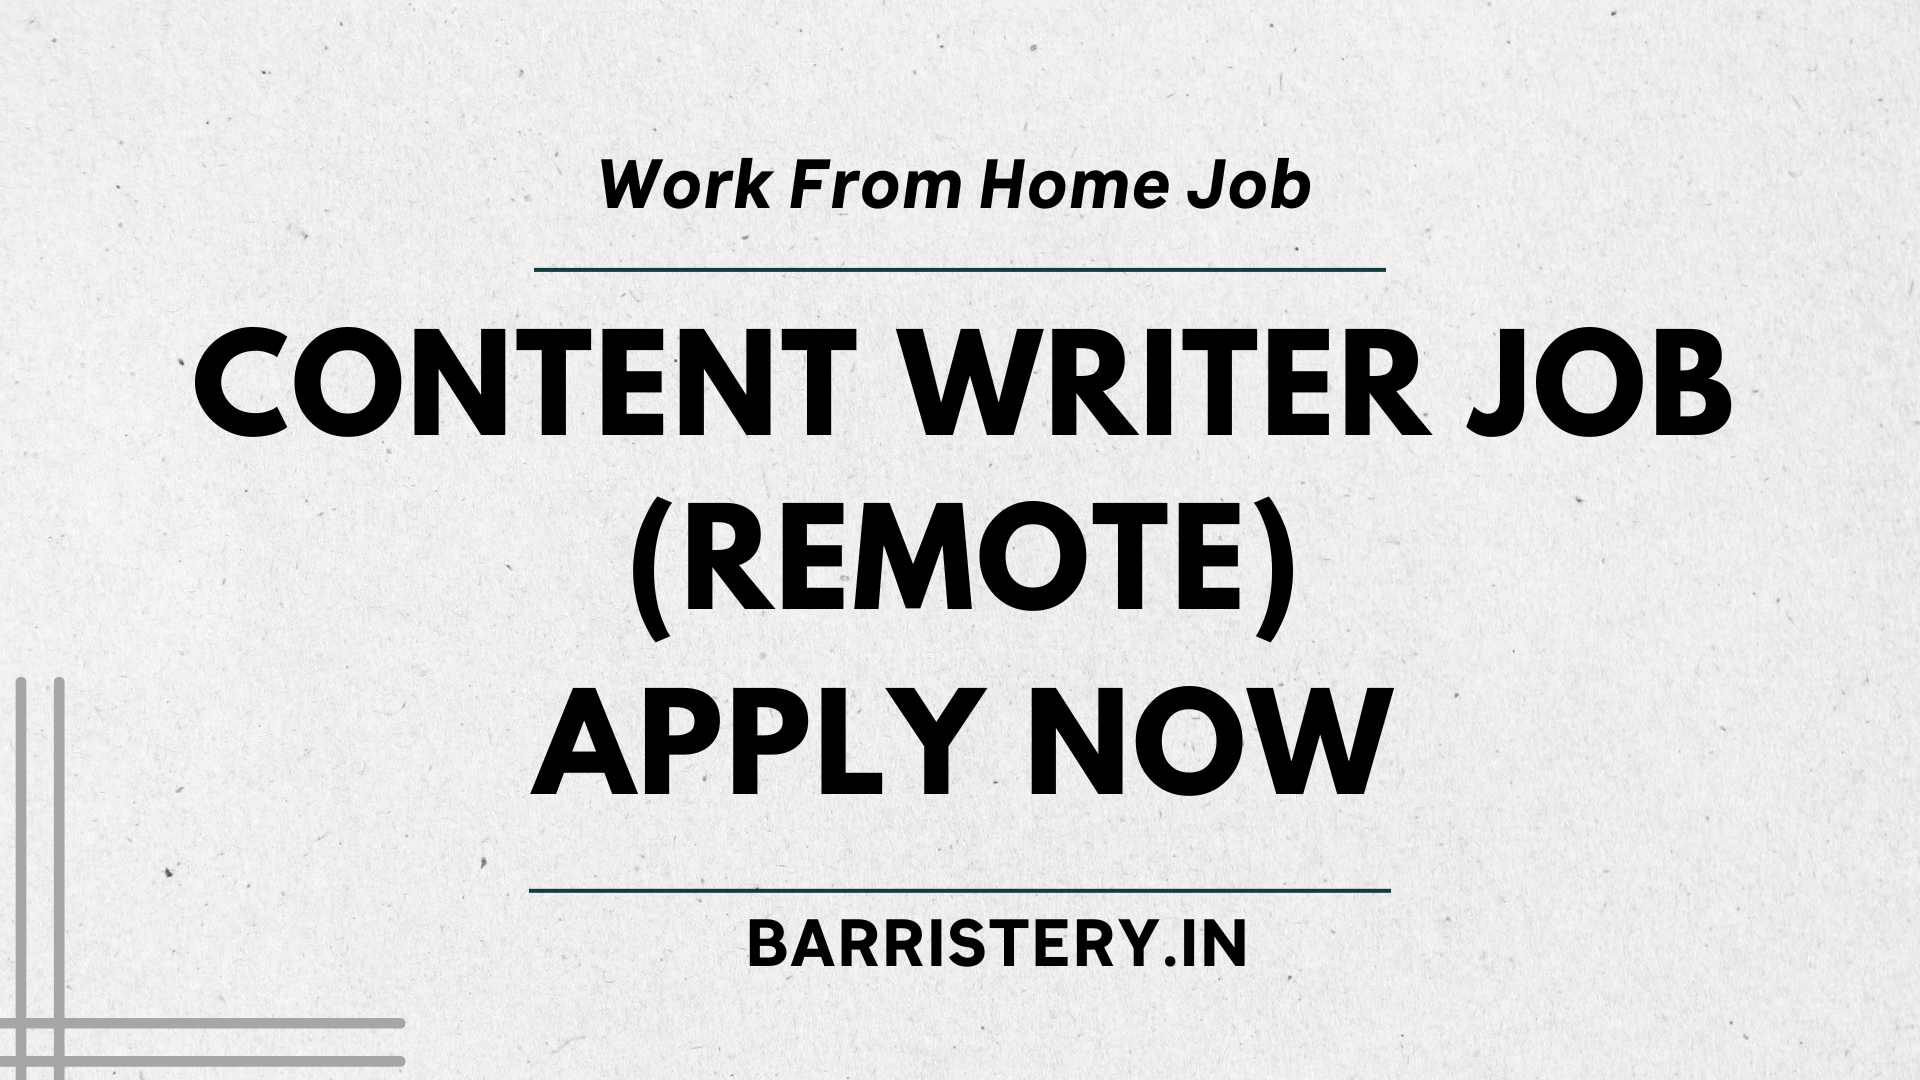 Content Writer Job at AskMeOffers (Remote) - Apply Now